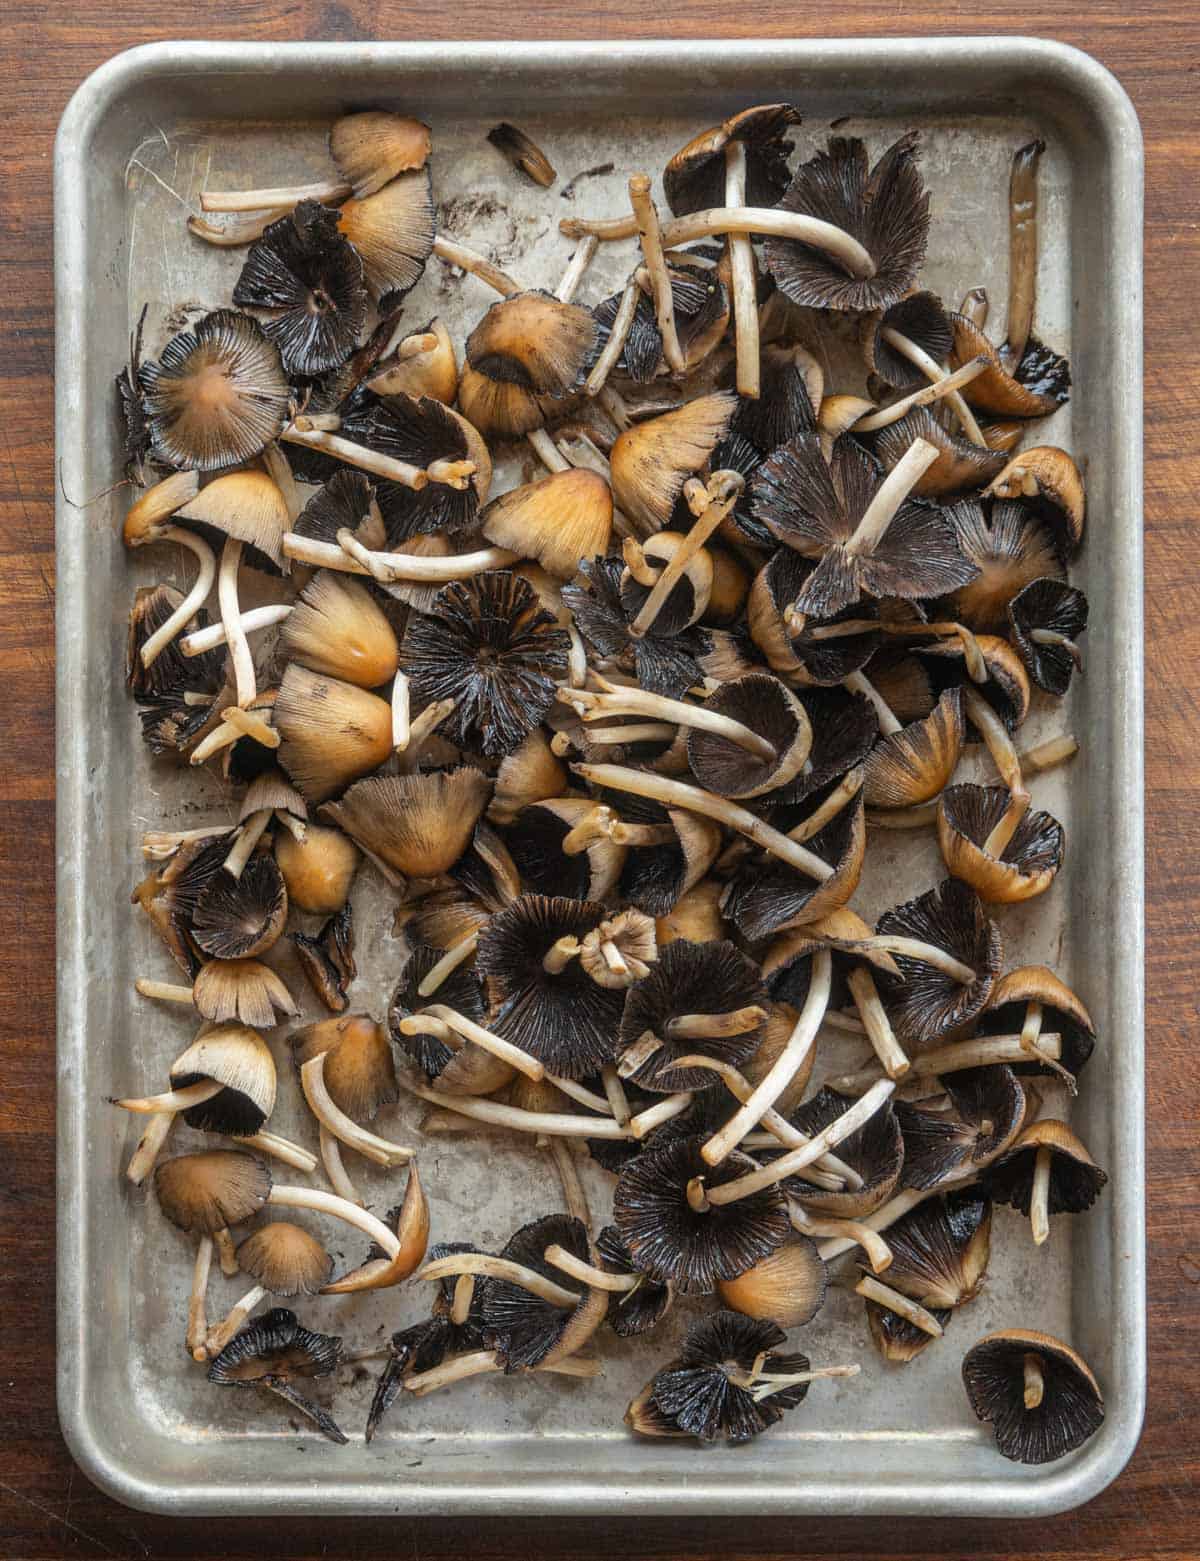 A tray of mica cap mushrooms 24 hours after picking showing the beginning of the deliquescing process. 